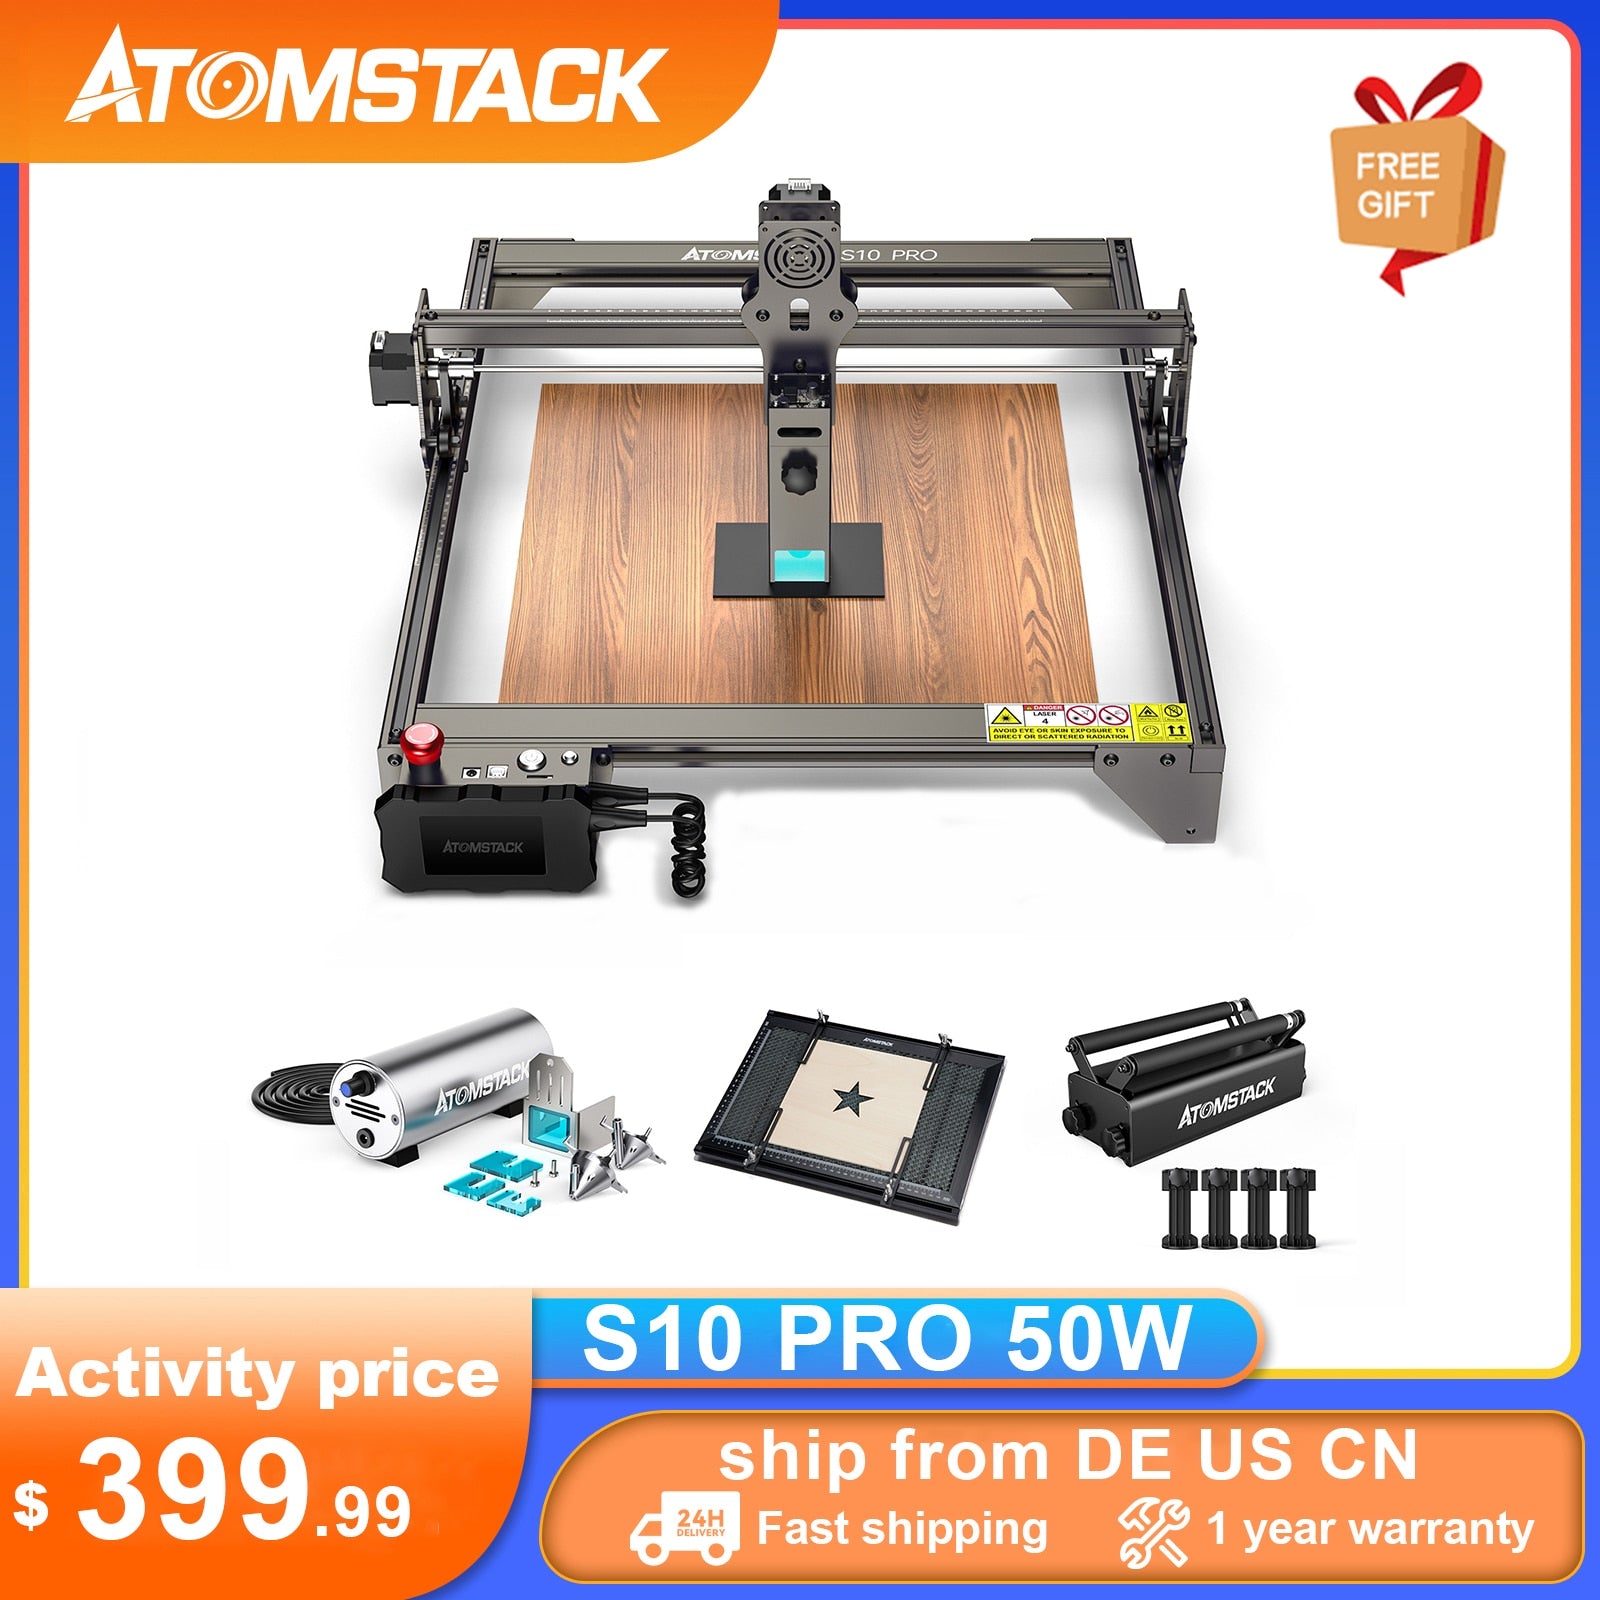 ATOMSTACK S10 A10 X7 PRO 50W Laser Engraving Machine CNC High-power Engraver Support Offline Carving Wood/Leather/Metal/Acrylic